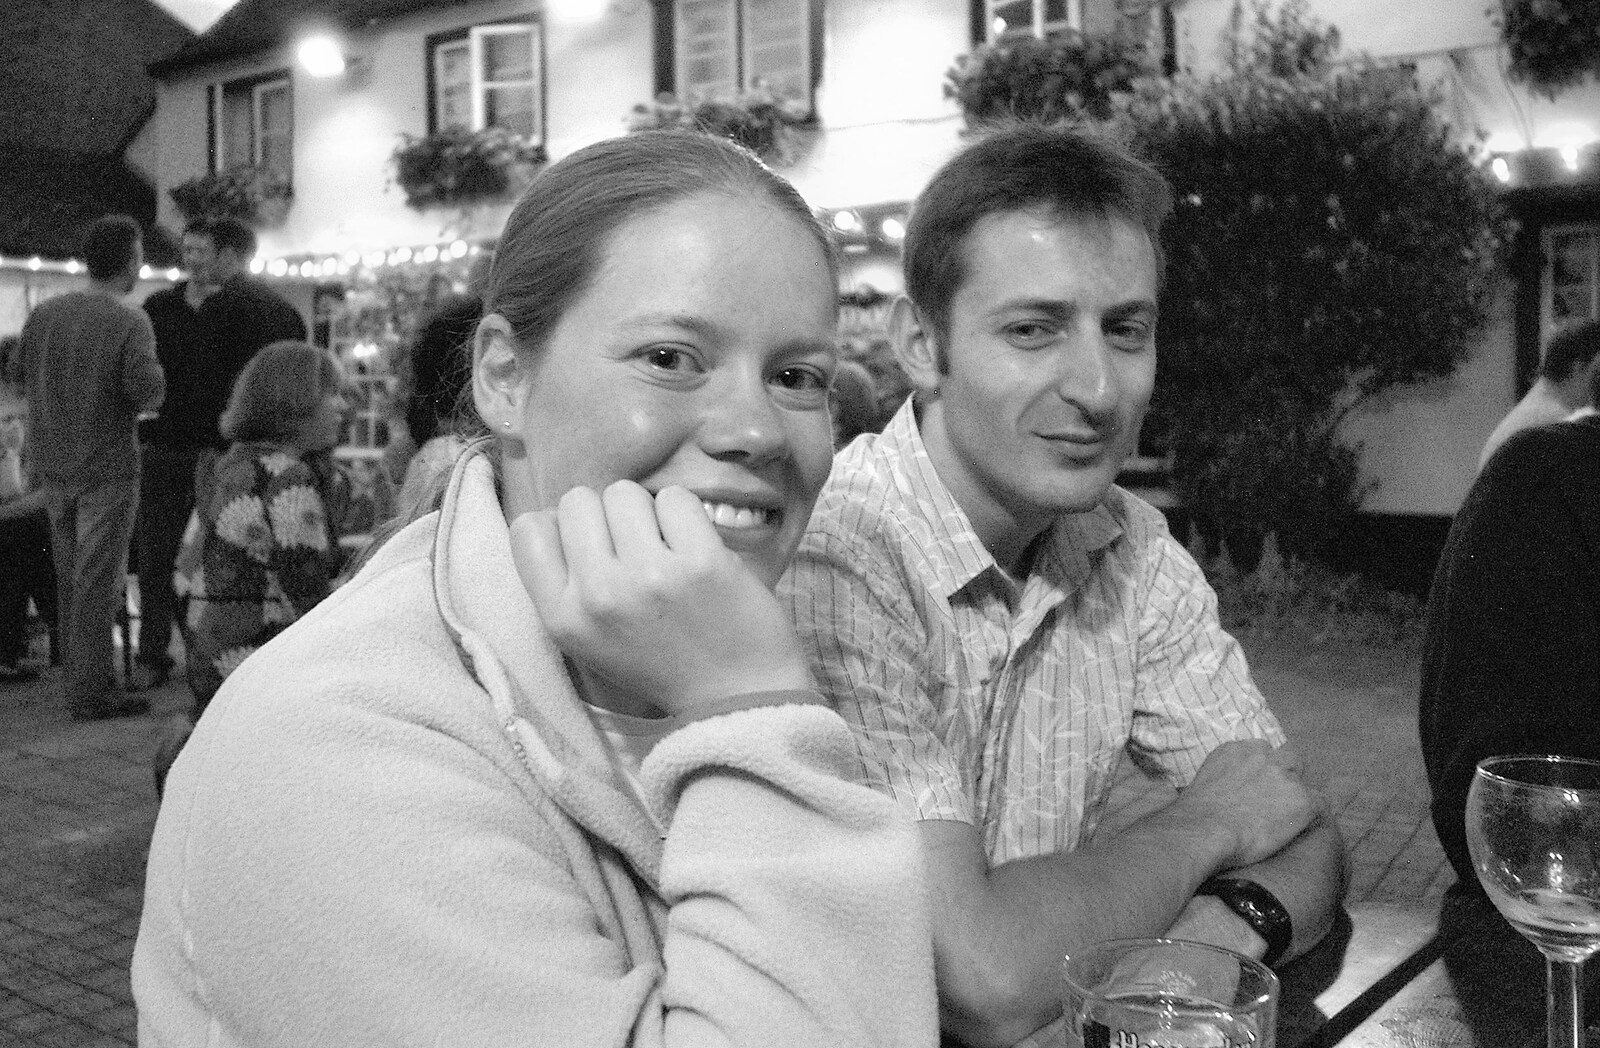 Clare and Ben from Ben Leaves "The Lab", Fort St. George, Cambridge - 16th June 2006